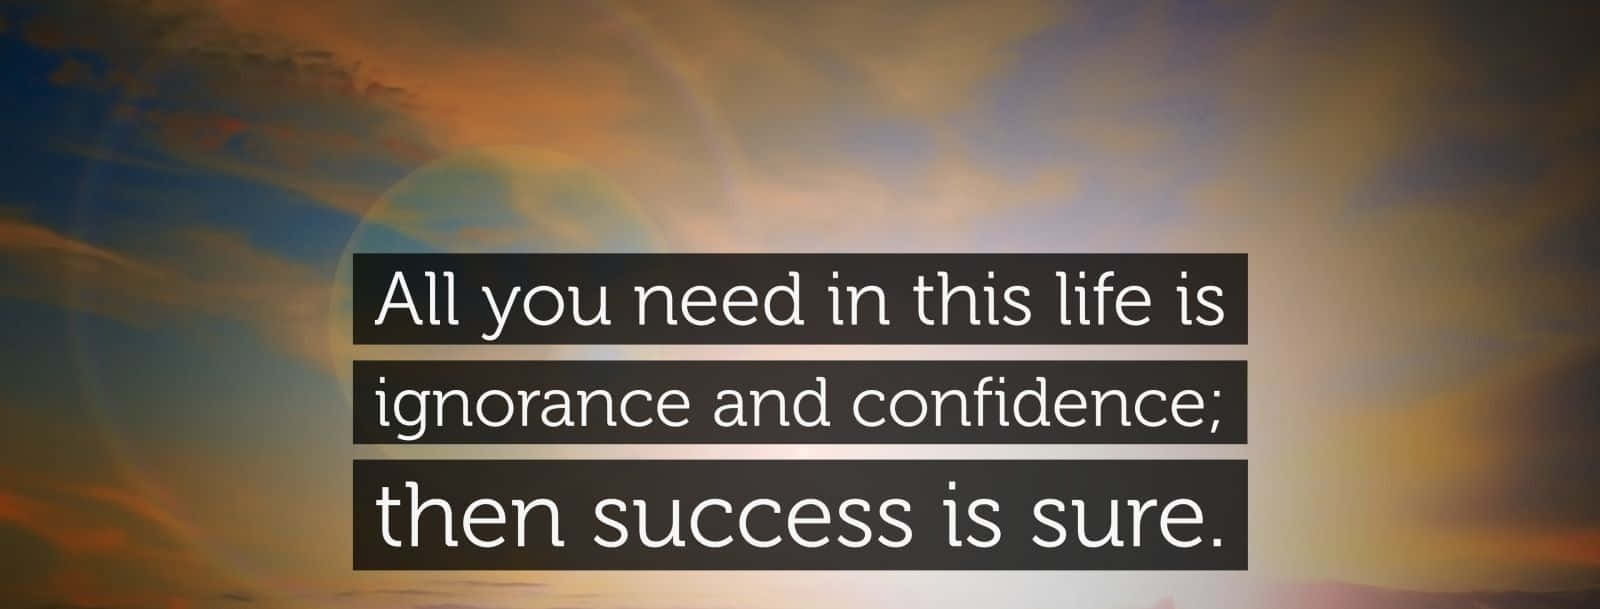 All You Need In This Life Confidence Quote Wallpaper